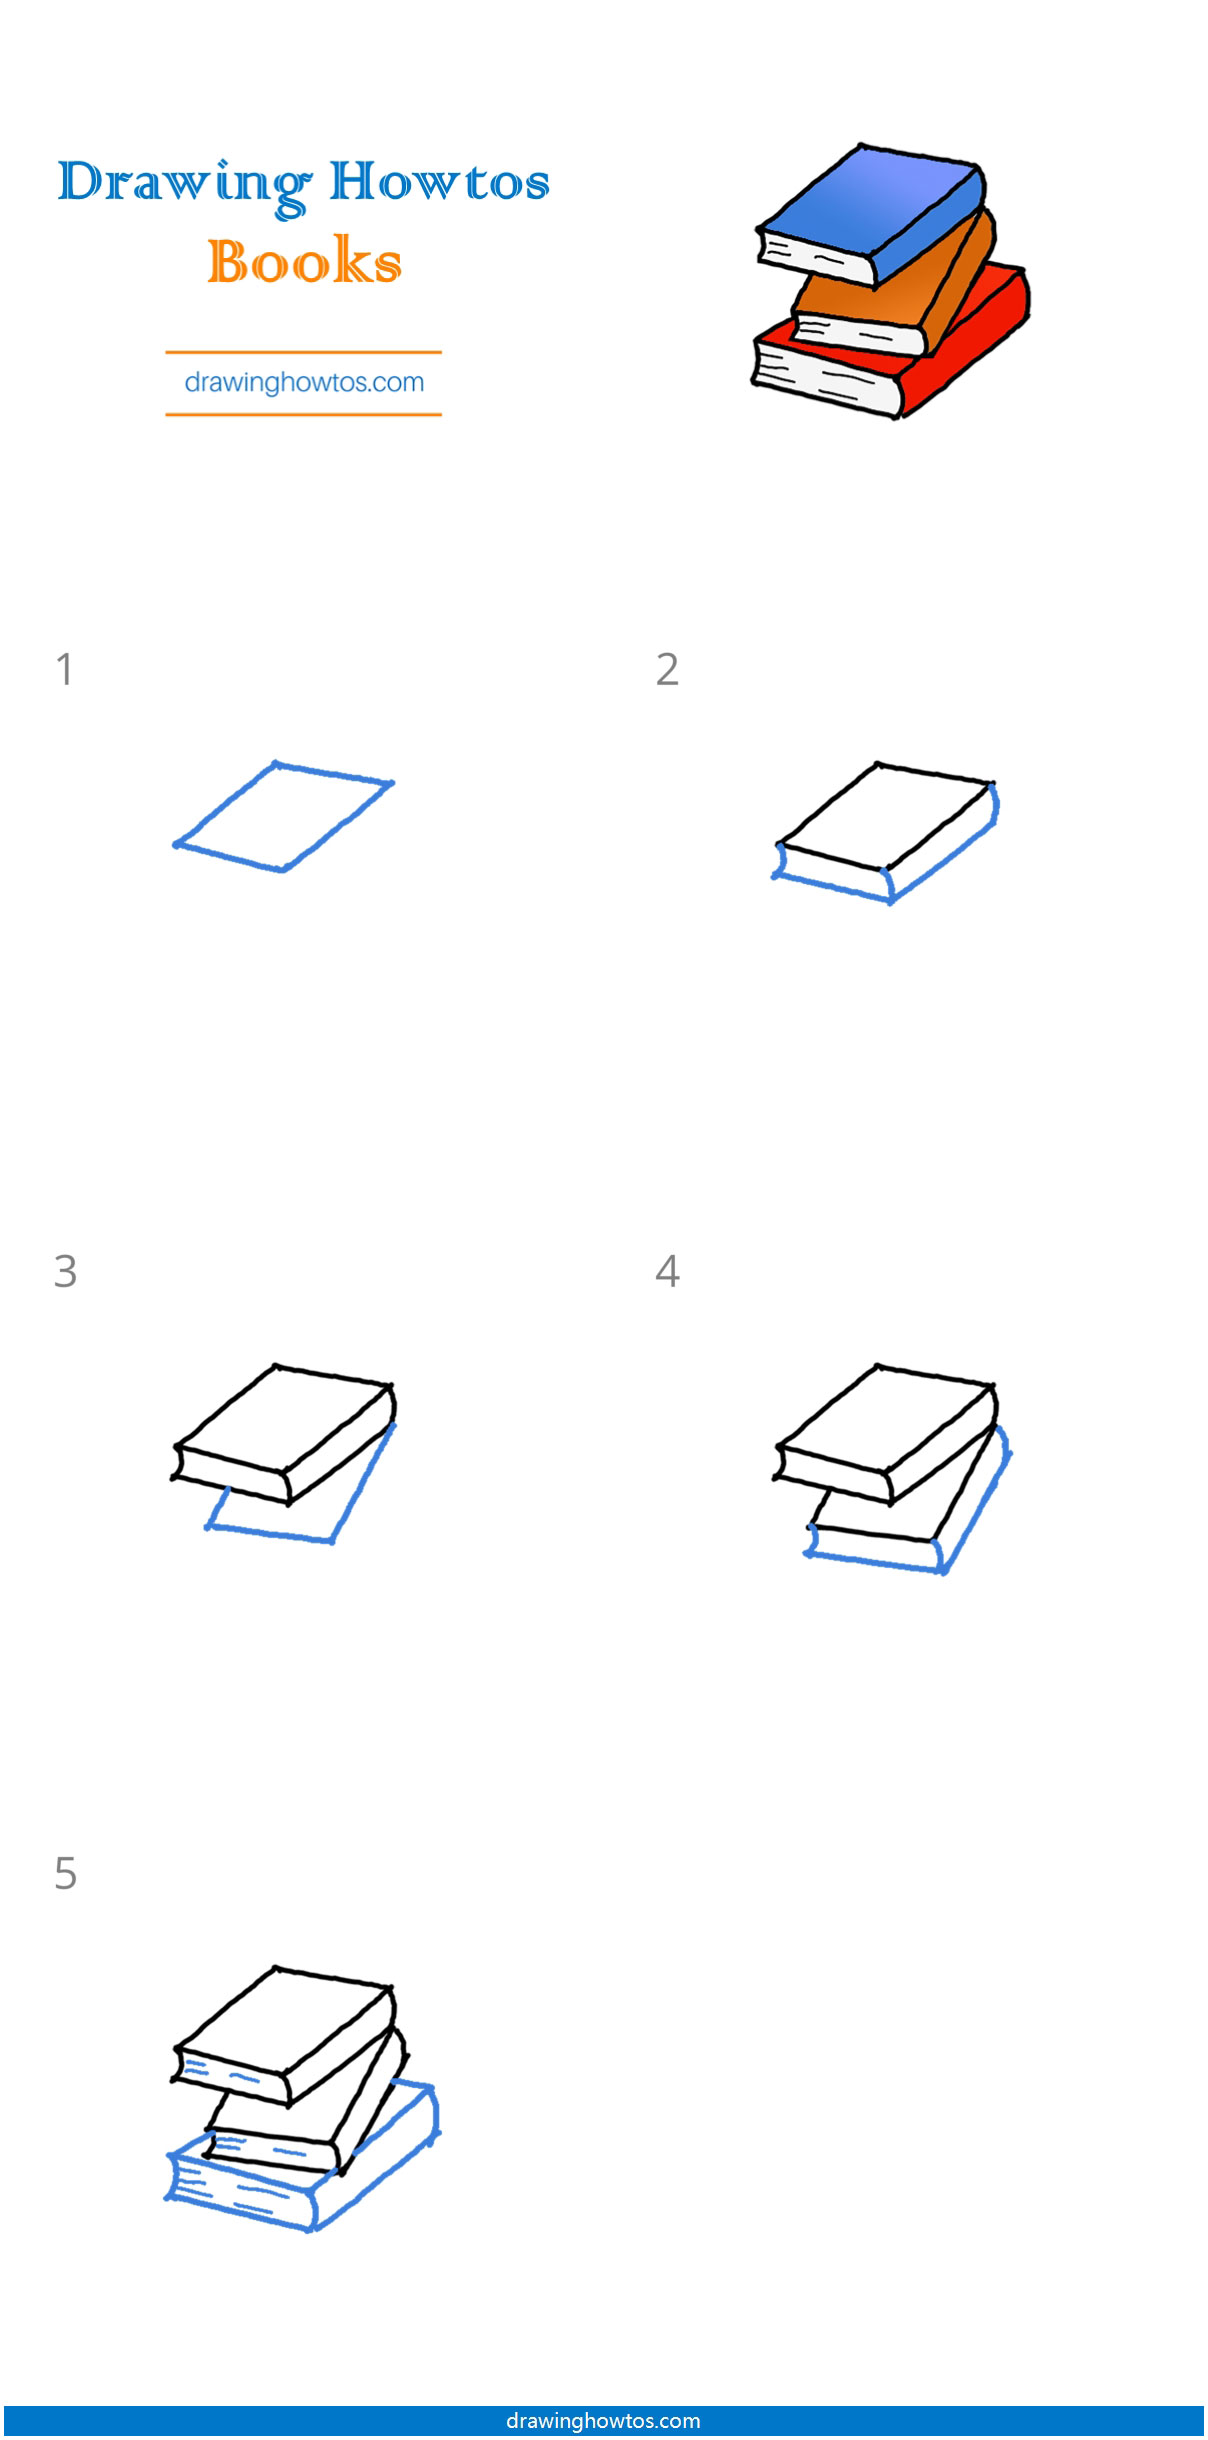 How to Draw Books Step by Step